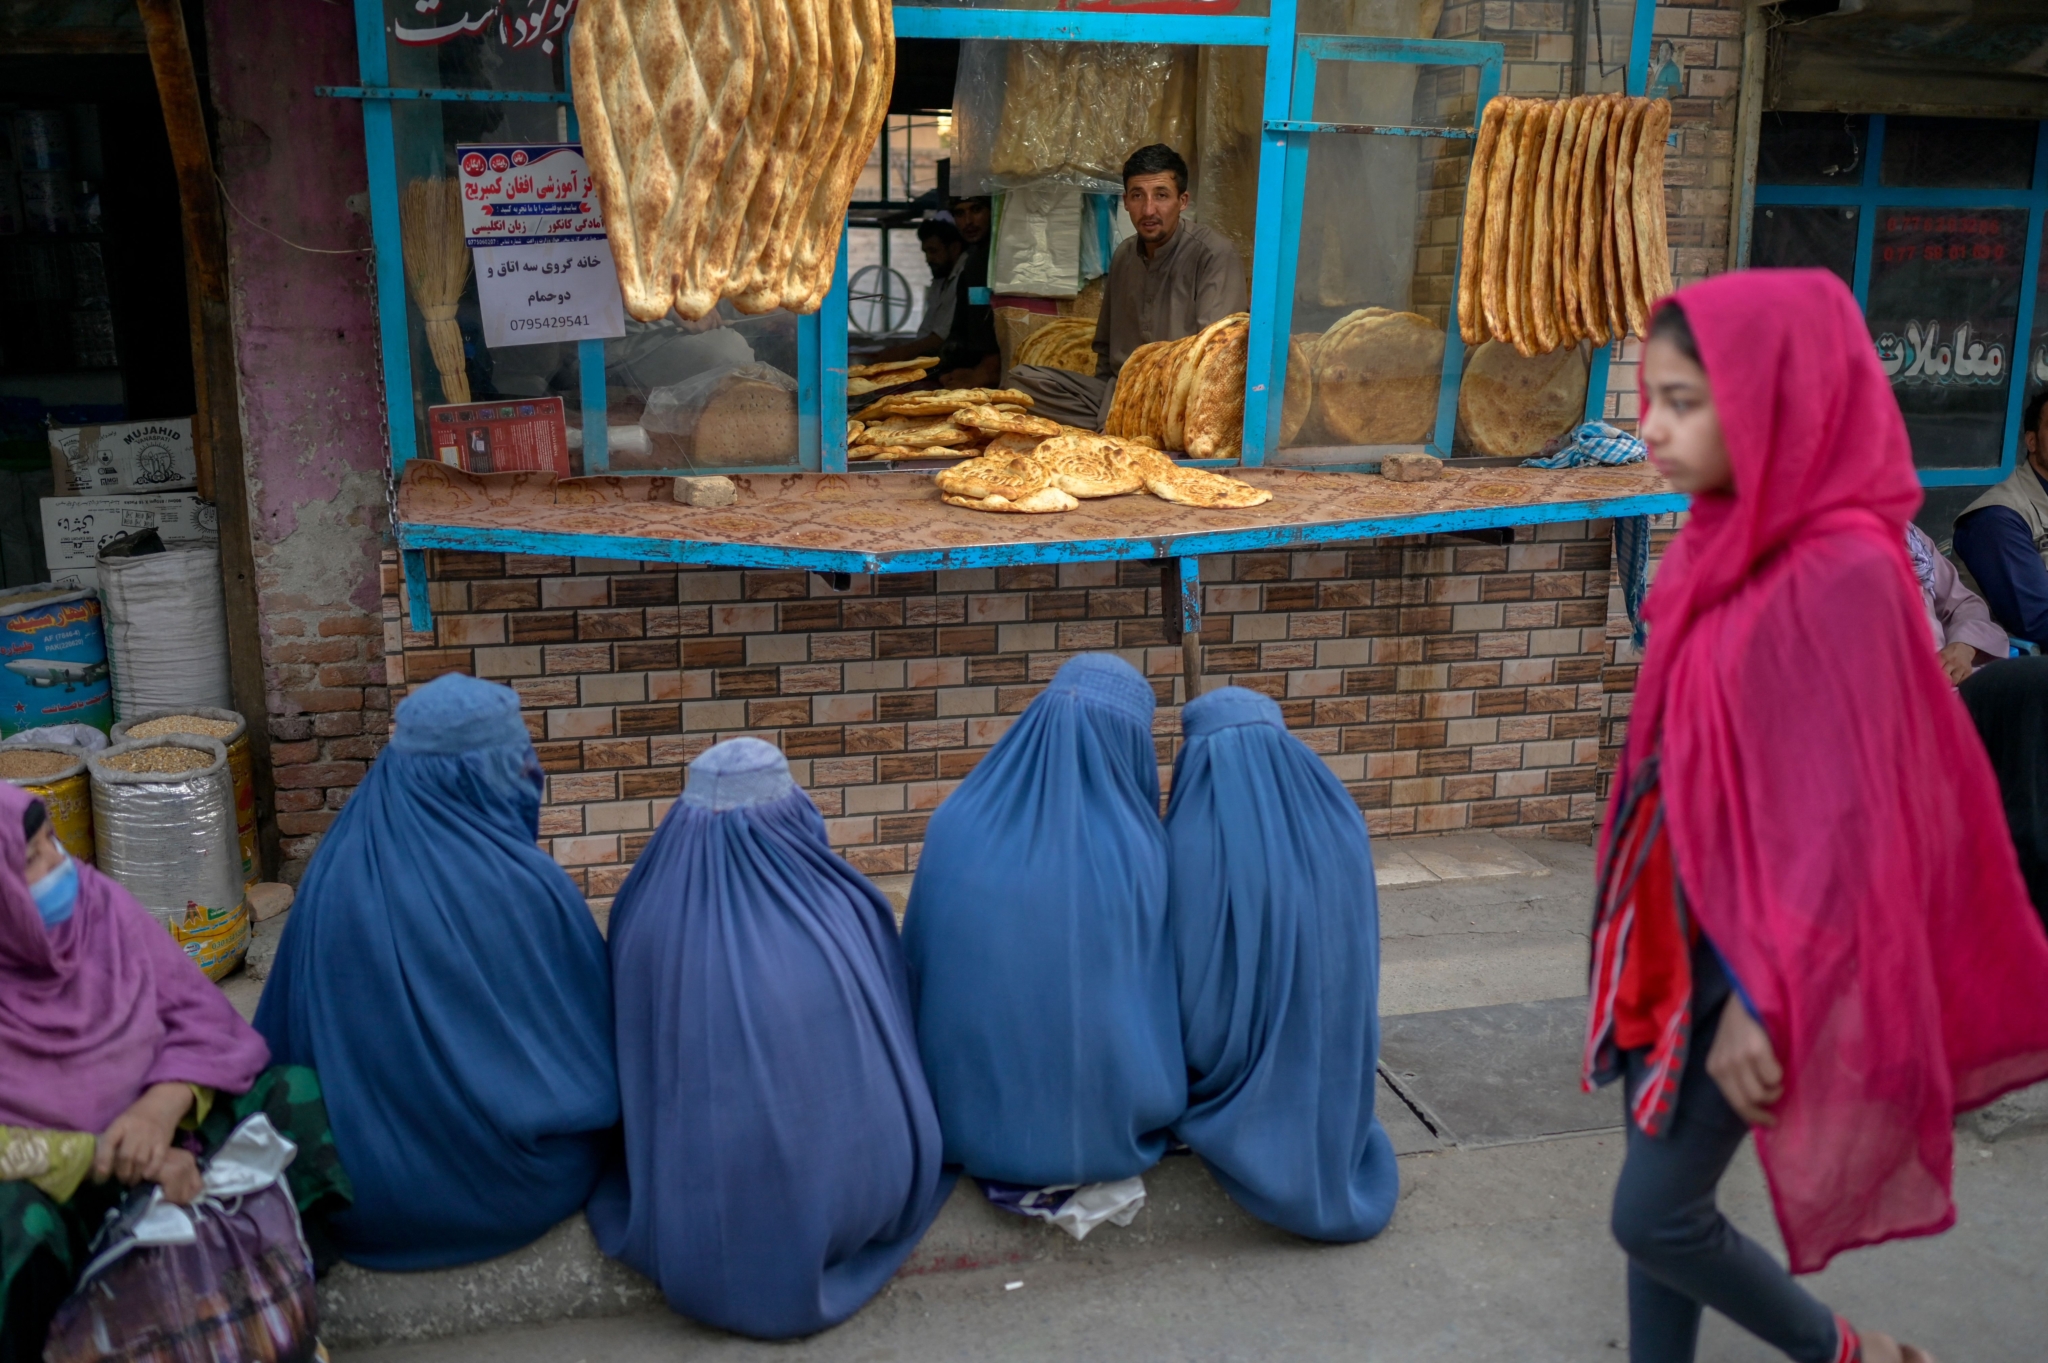 Burqa-clad women wait for free bread in front of a bakery in Kabul on September 16, 2021.